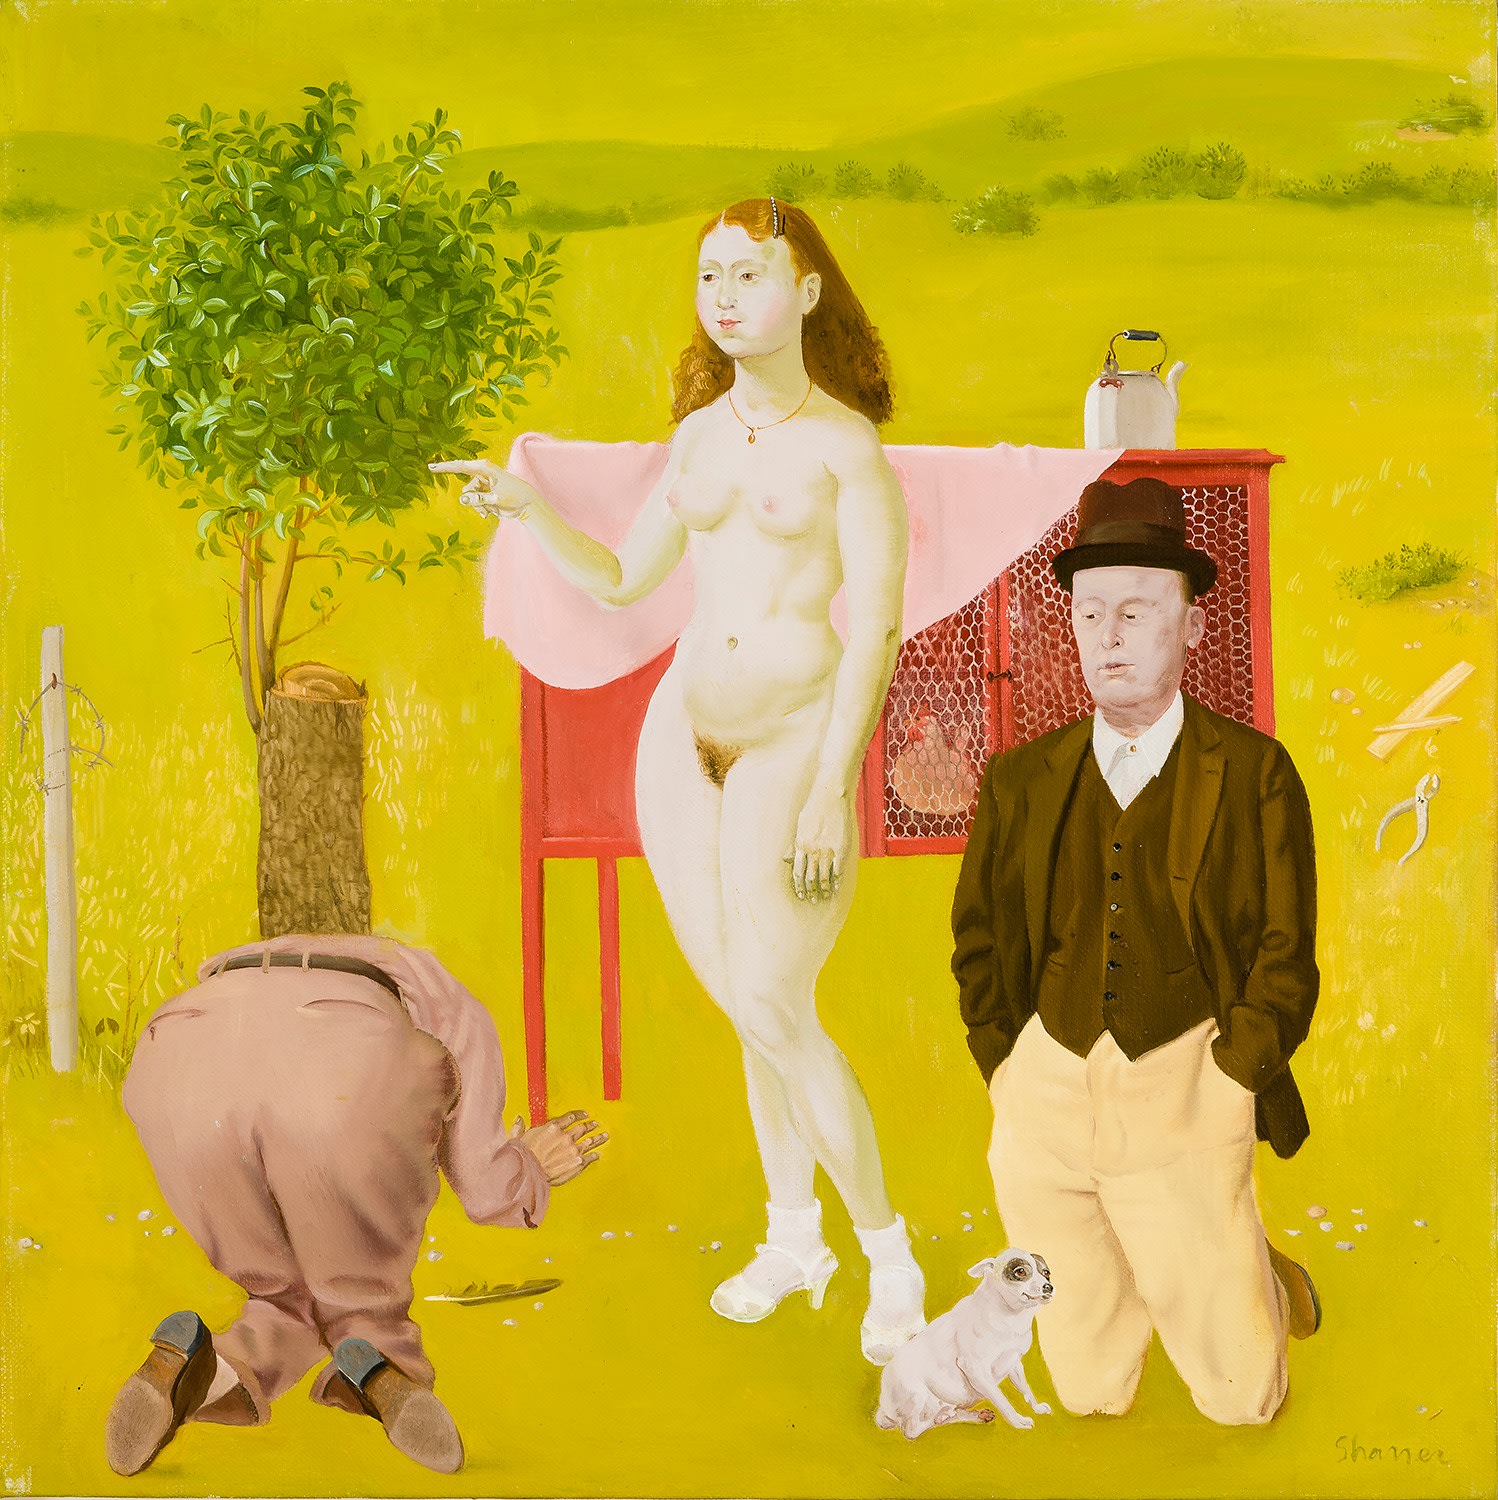 HONOR&Eacute; SHARRER (1920&ndash;2009), Spring and the Estes Brothers, 1986. Oil on canvas, 14 x 14 in.